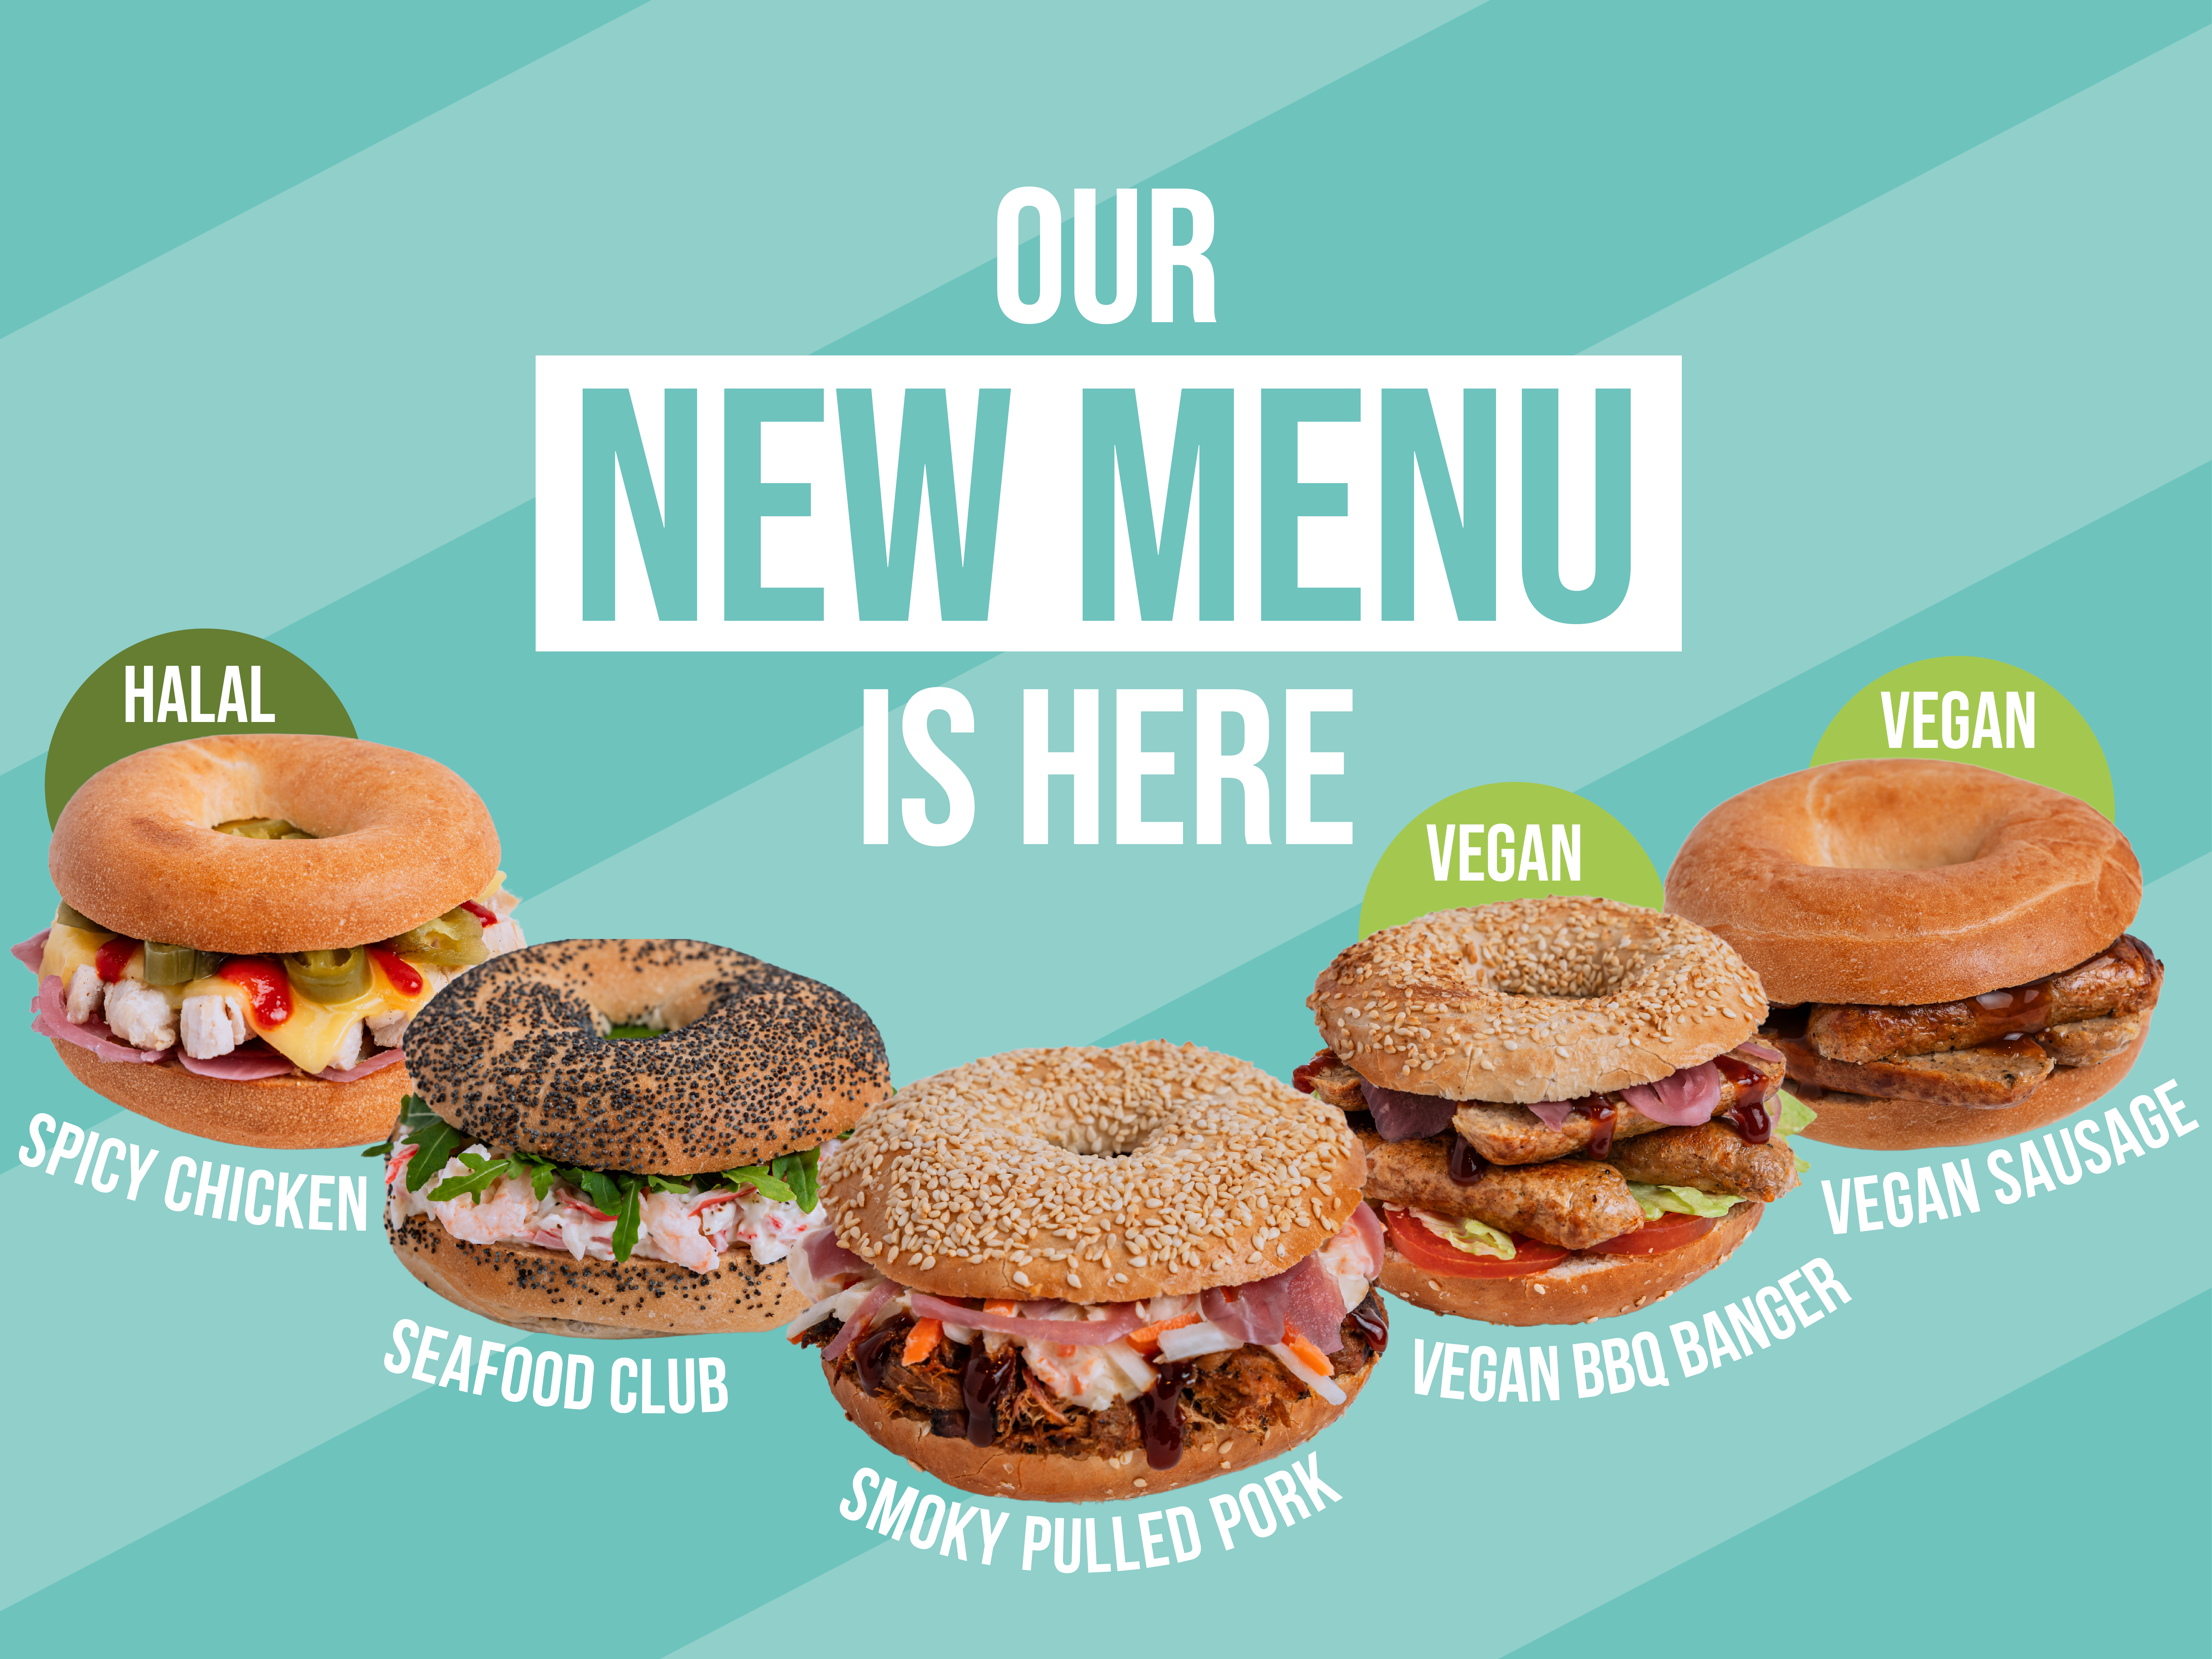 Our New Menu Is Here!